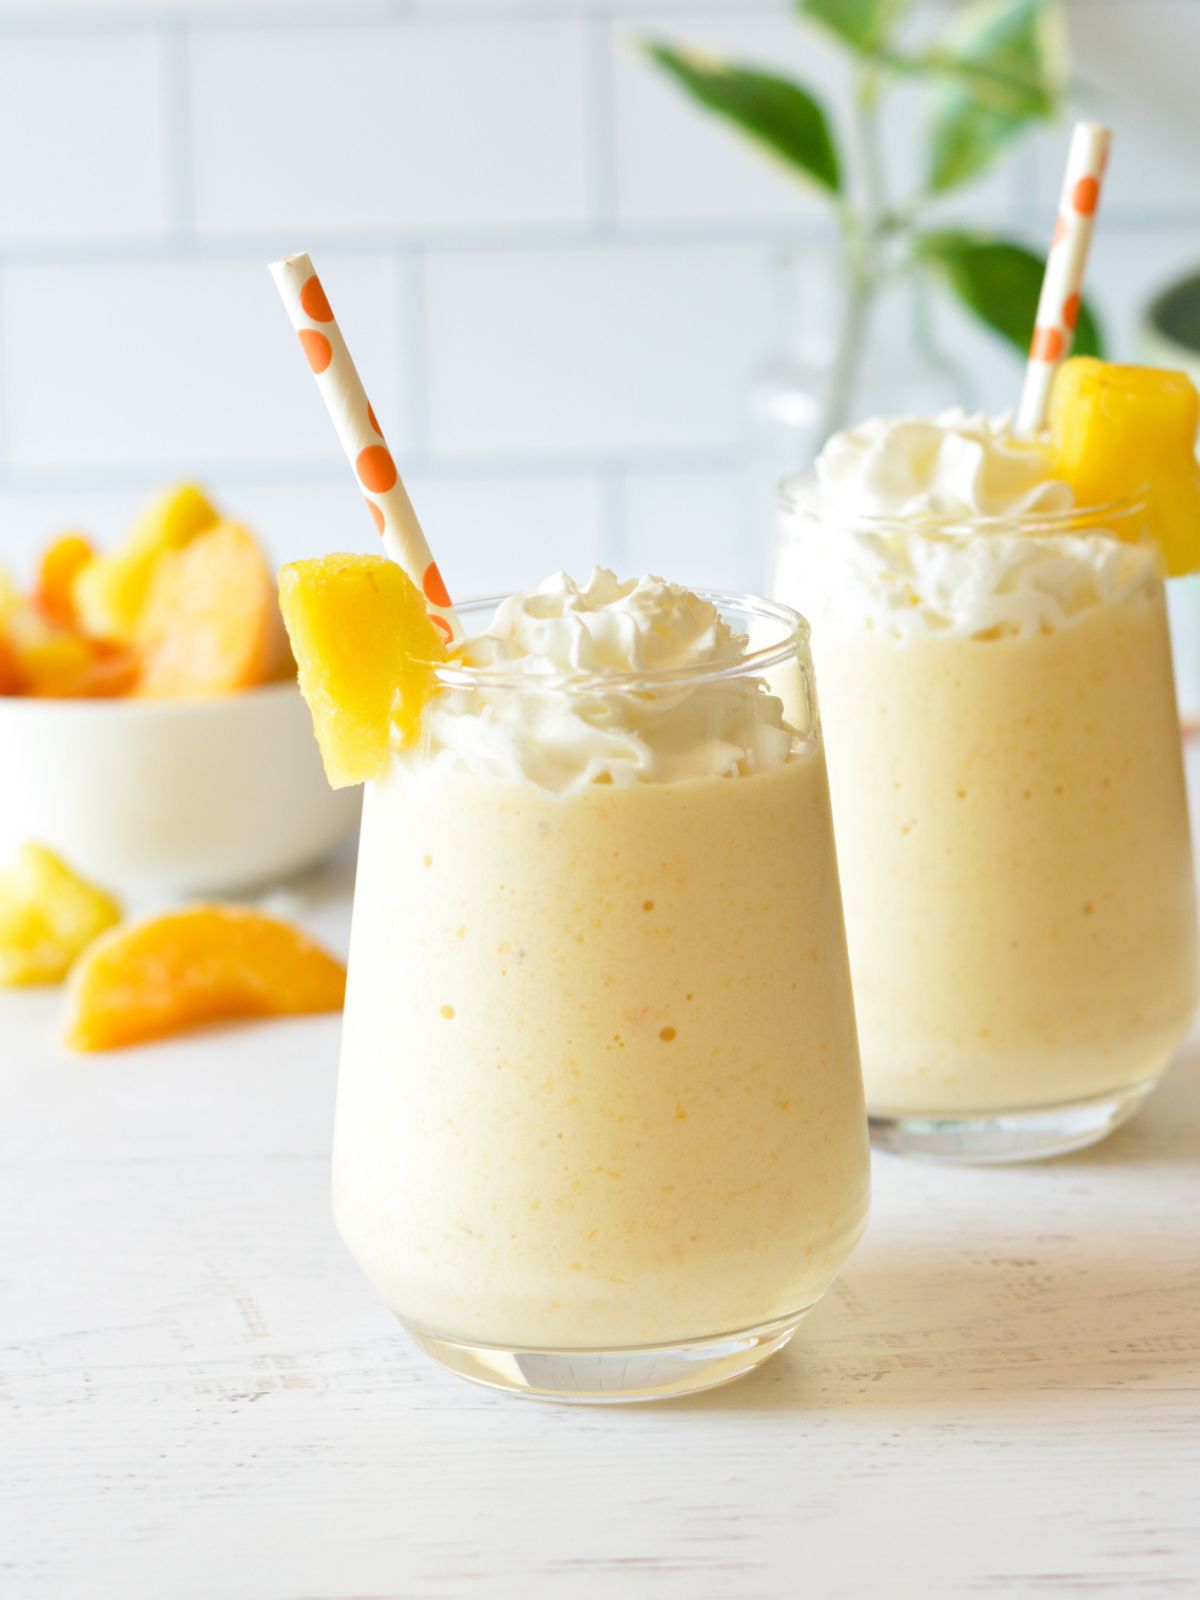 peach pineapple smoothies with whipped cream and pineapple.